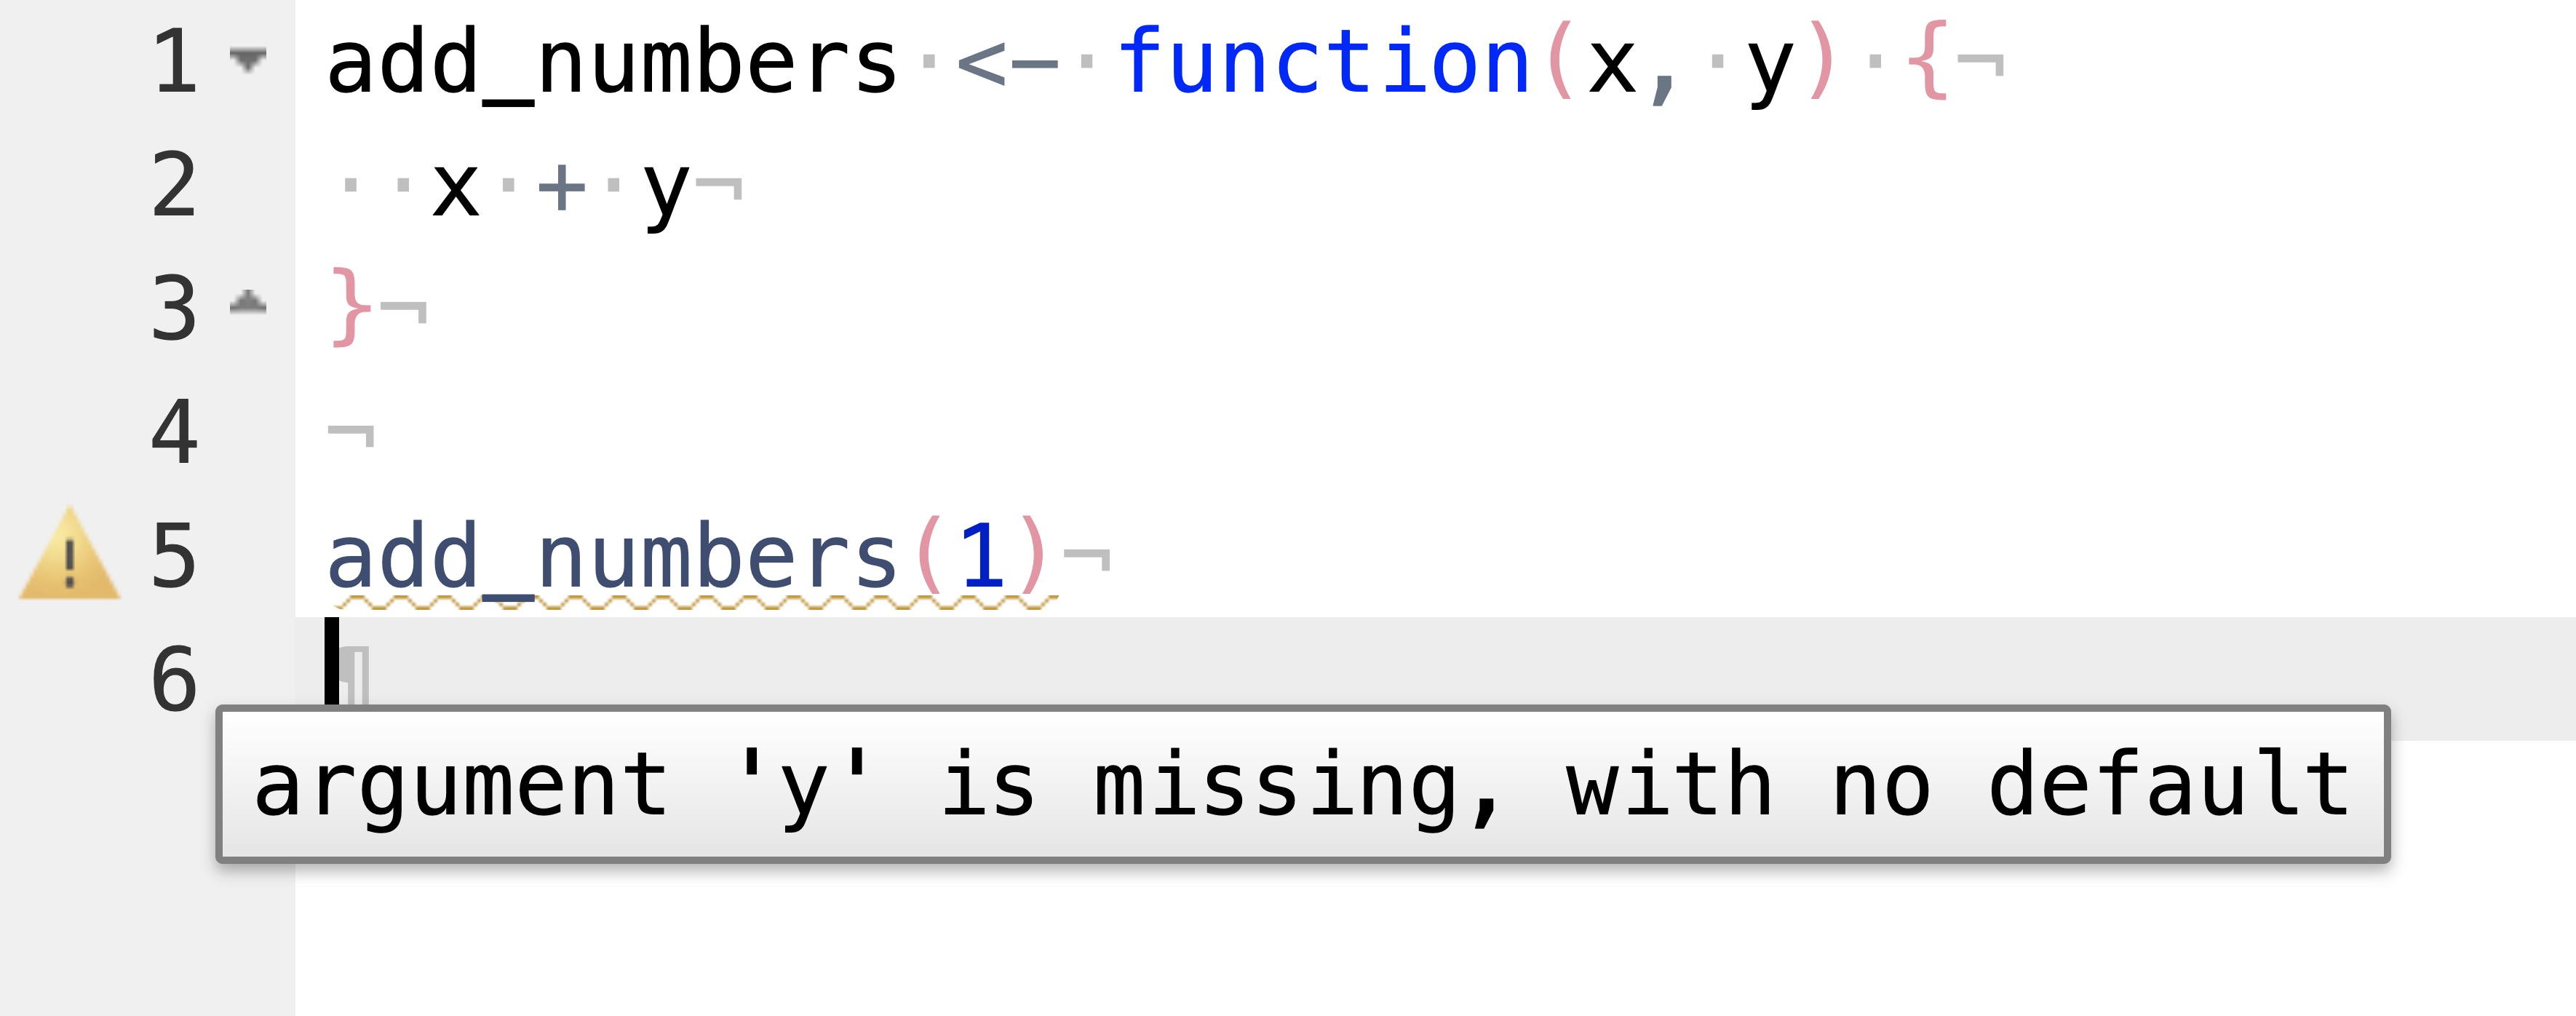 A screenshot of the RStudio error diagnostics suggesting that a function argument is missing.